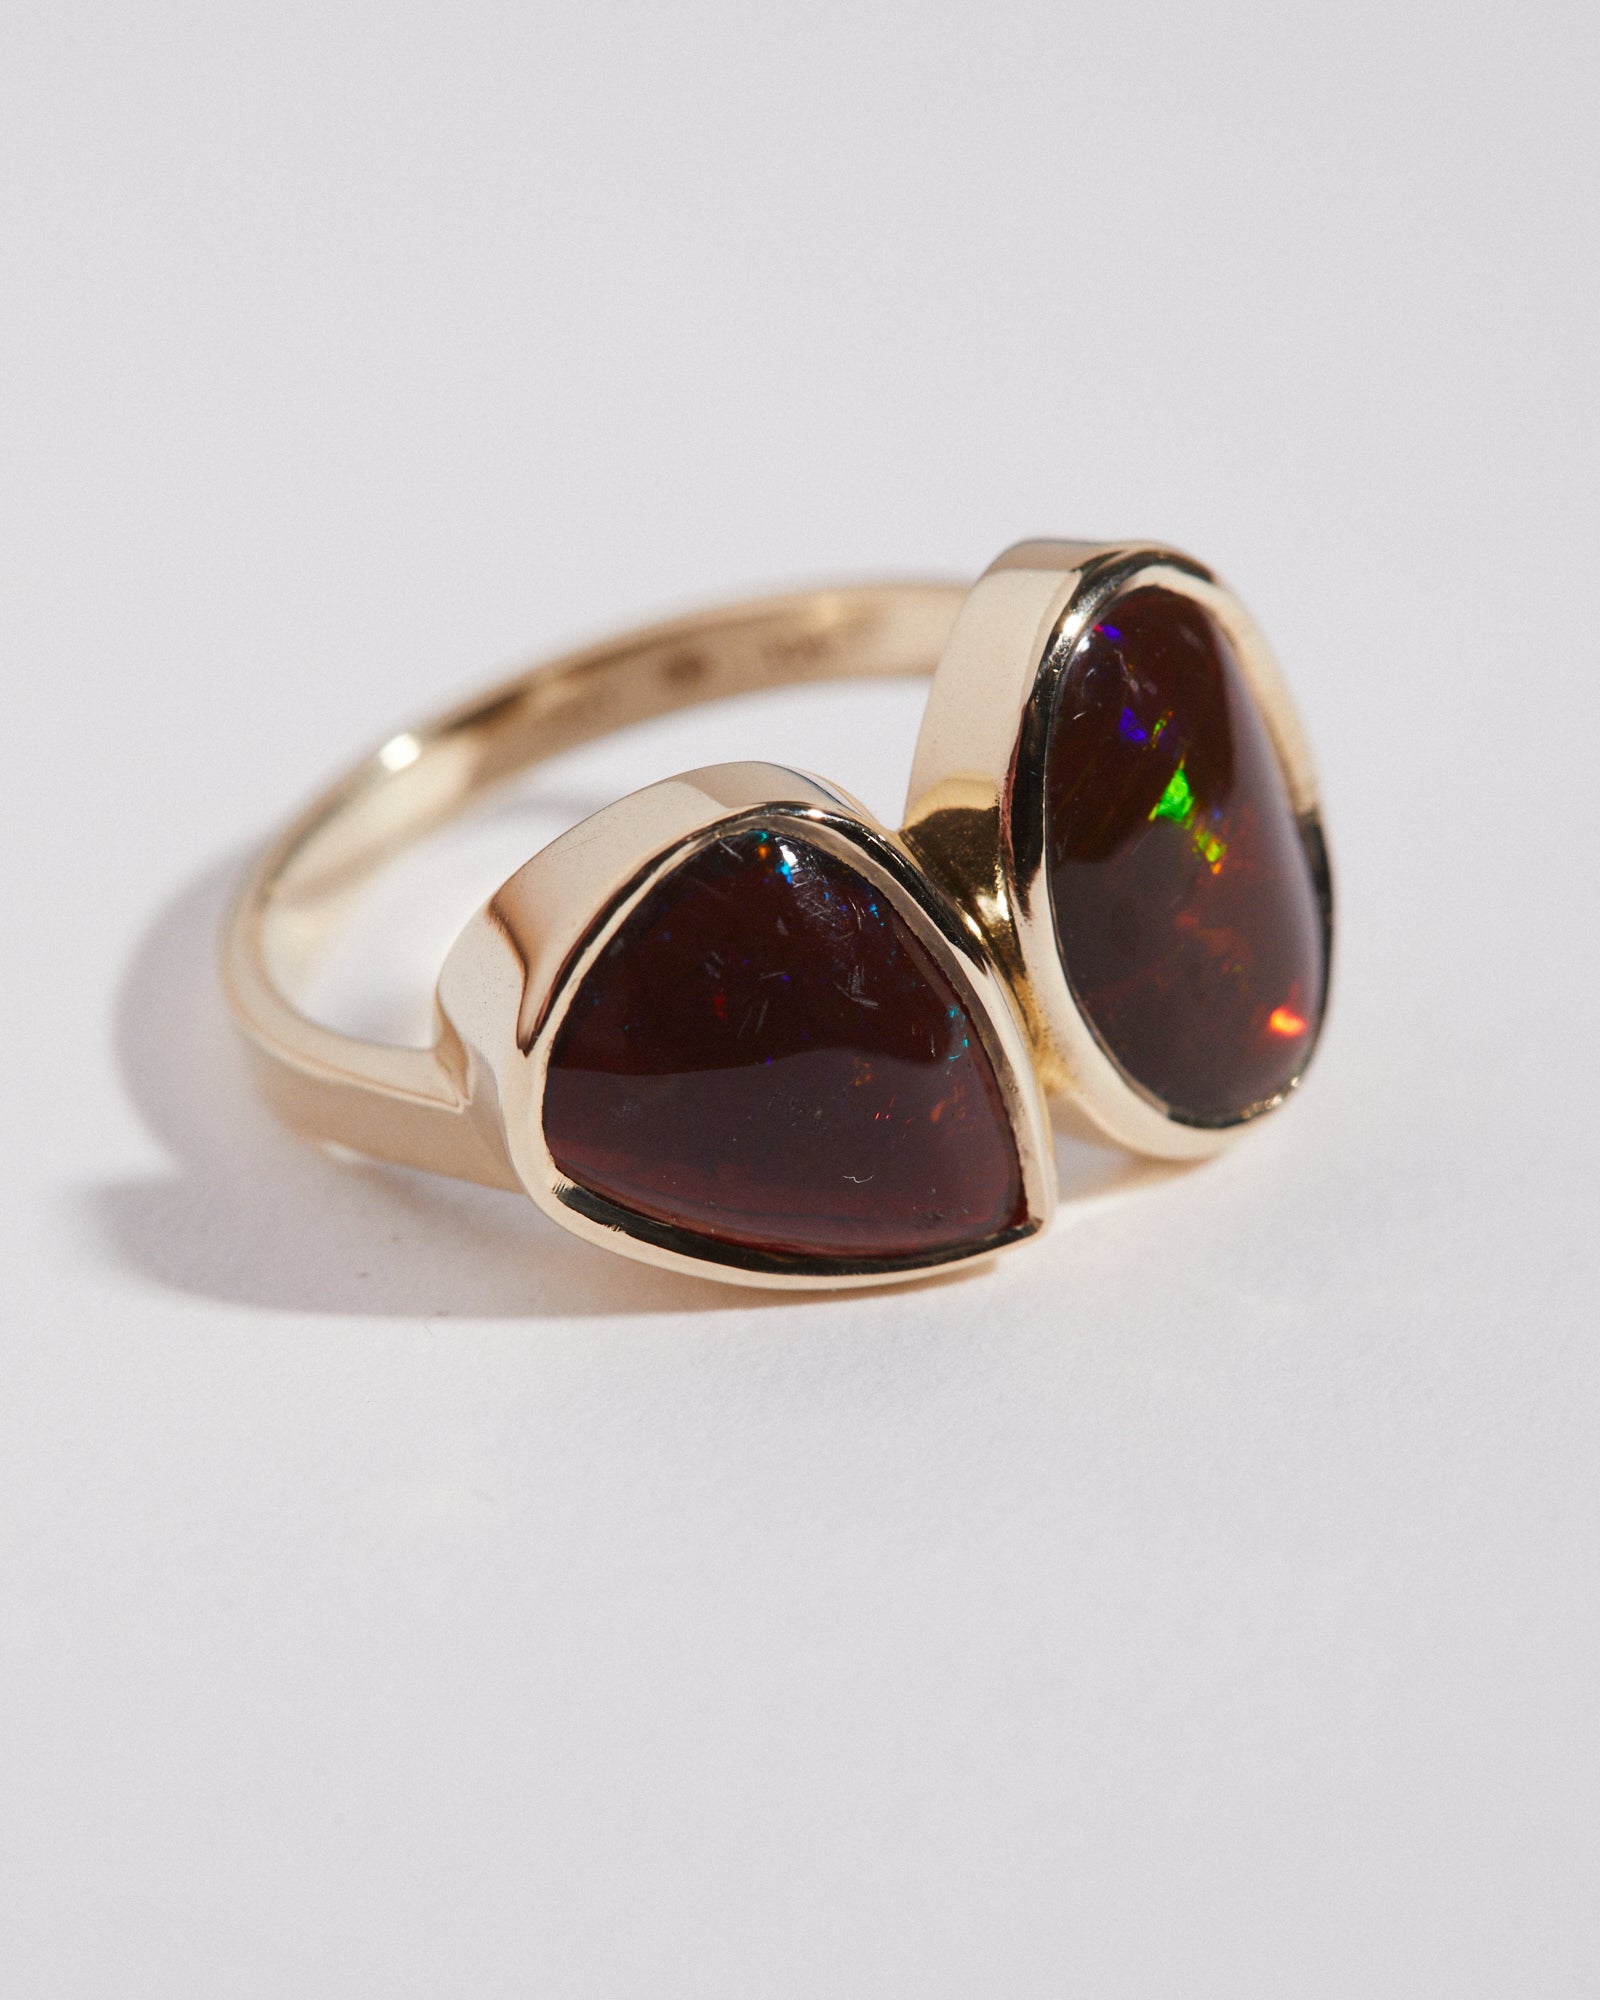 16ct Mexican Fire Opal Toi et Moi ring